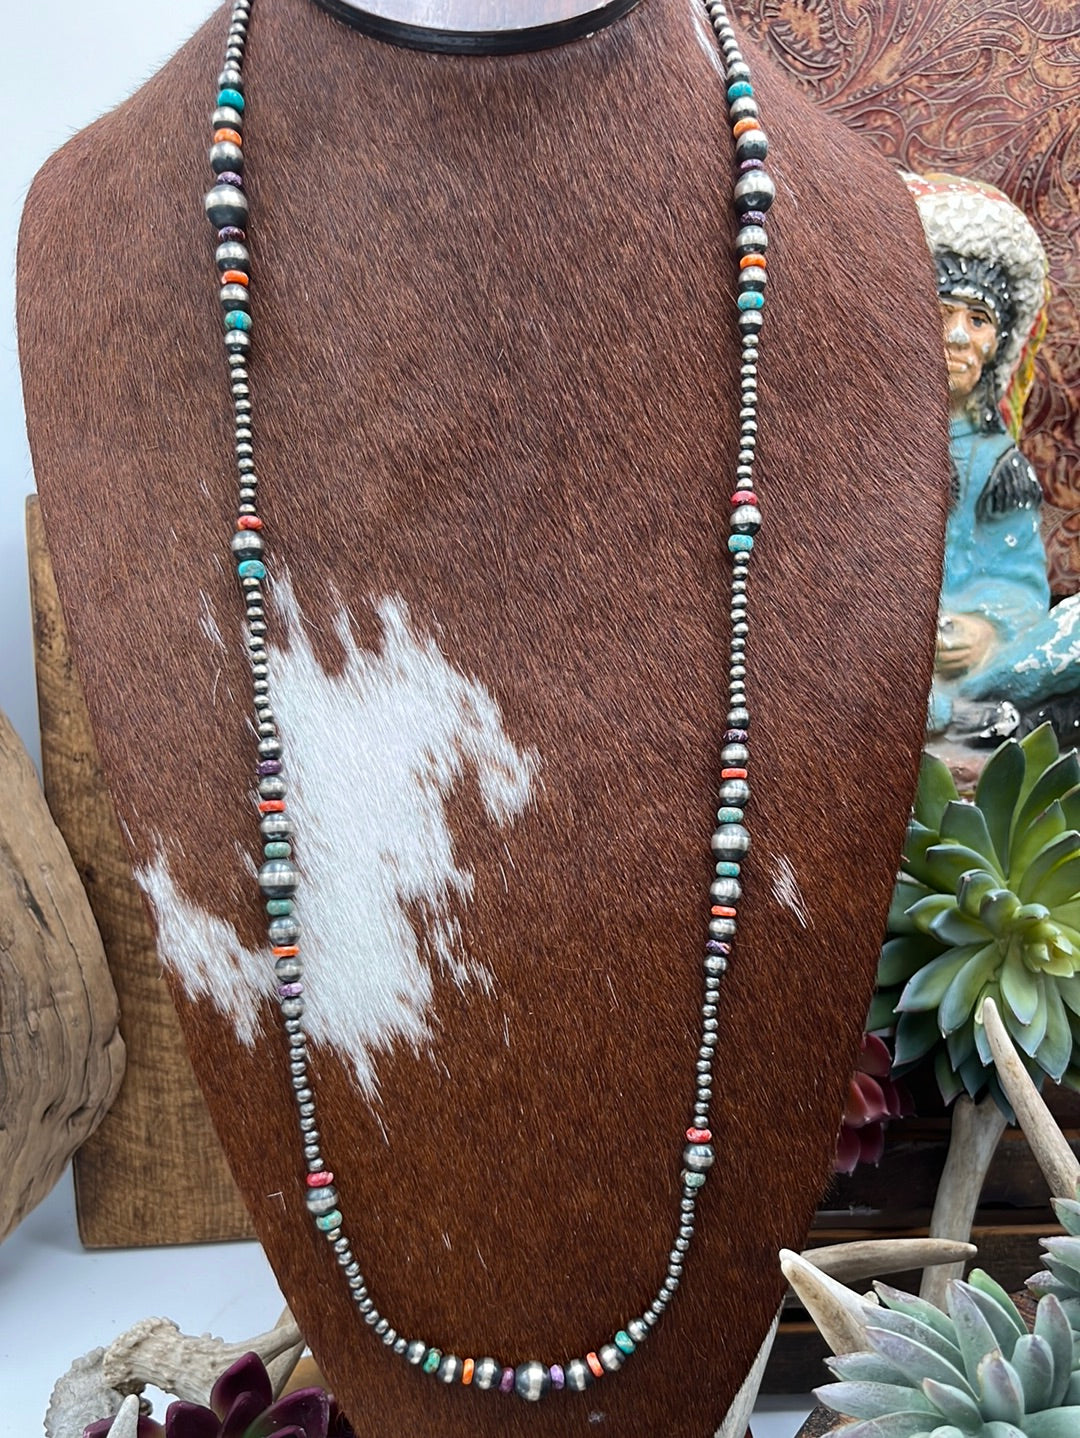 Ellen Sterling Navajo, Turquoise & Spiny Bead Necklace - 36"